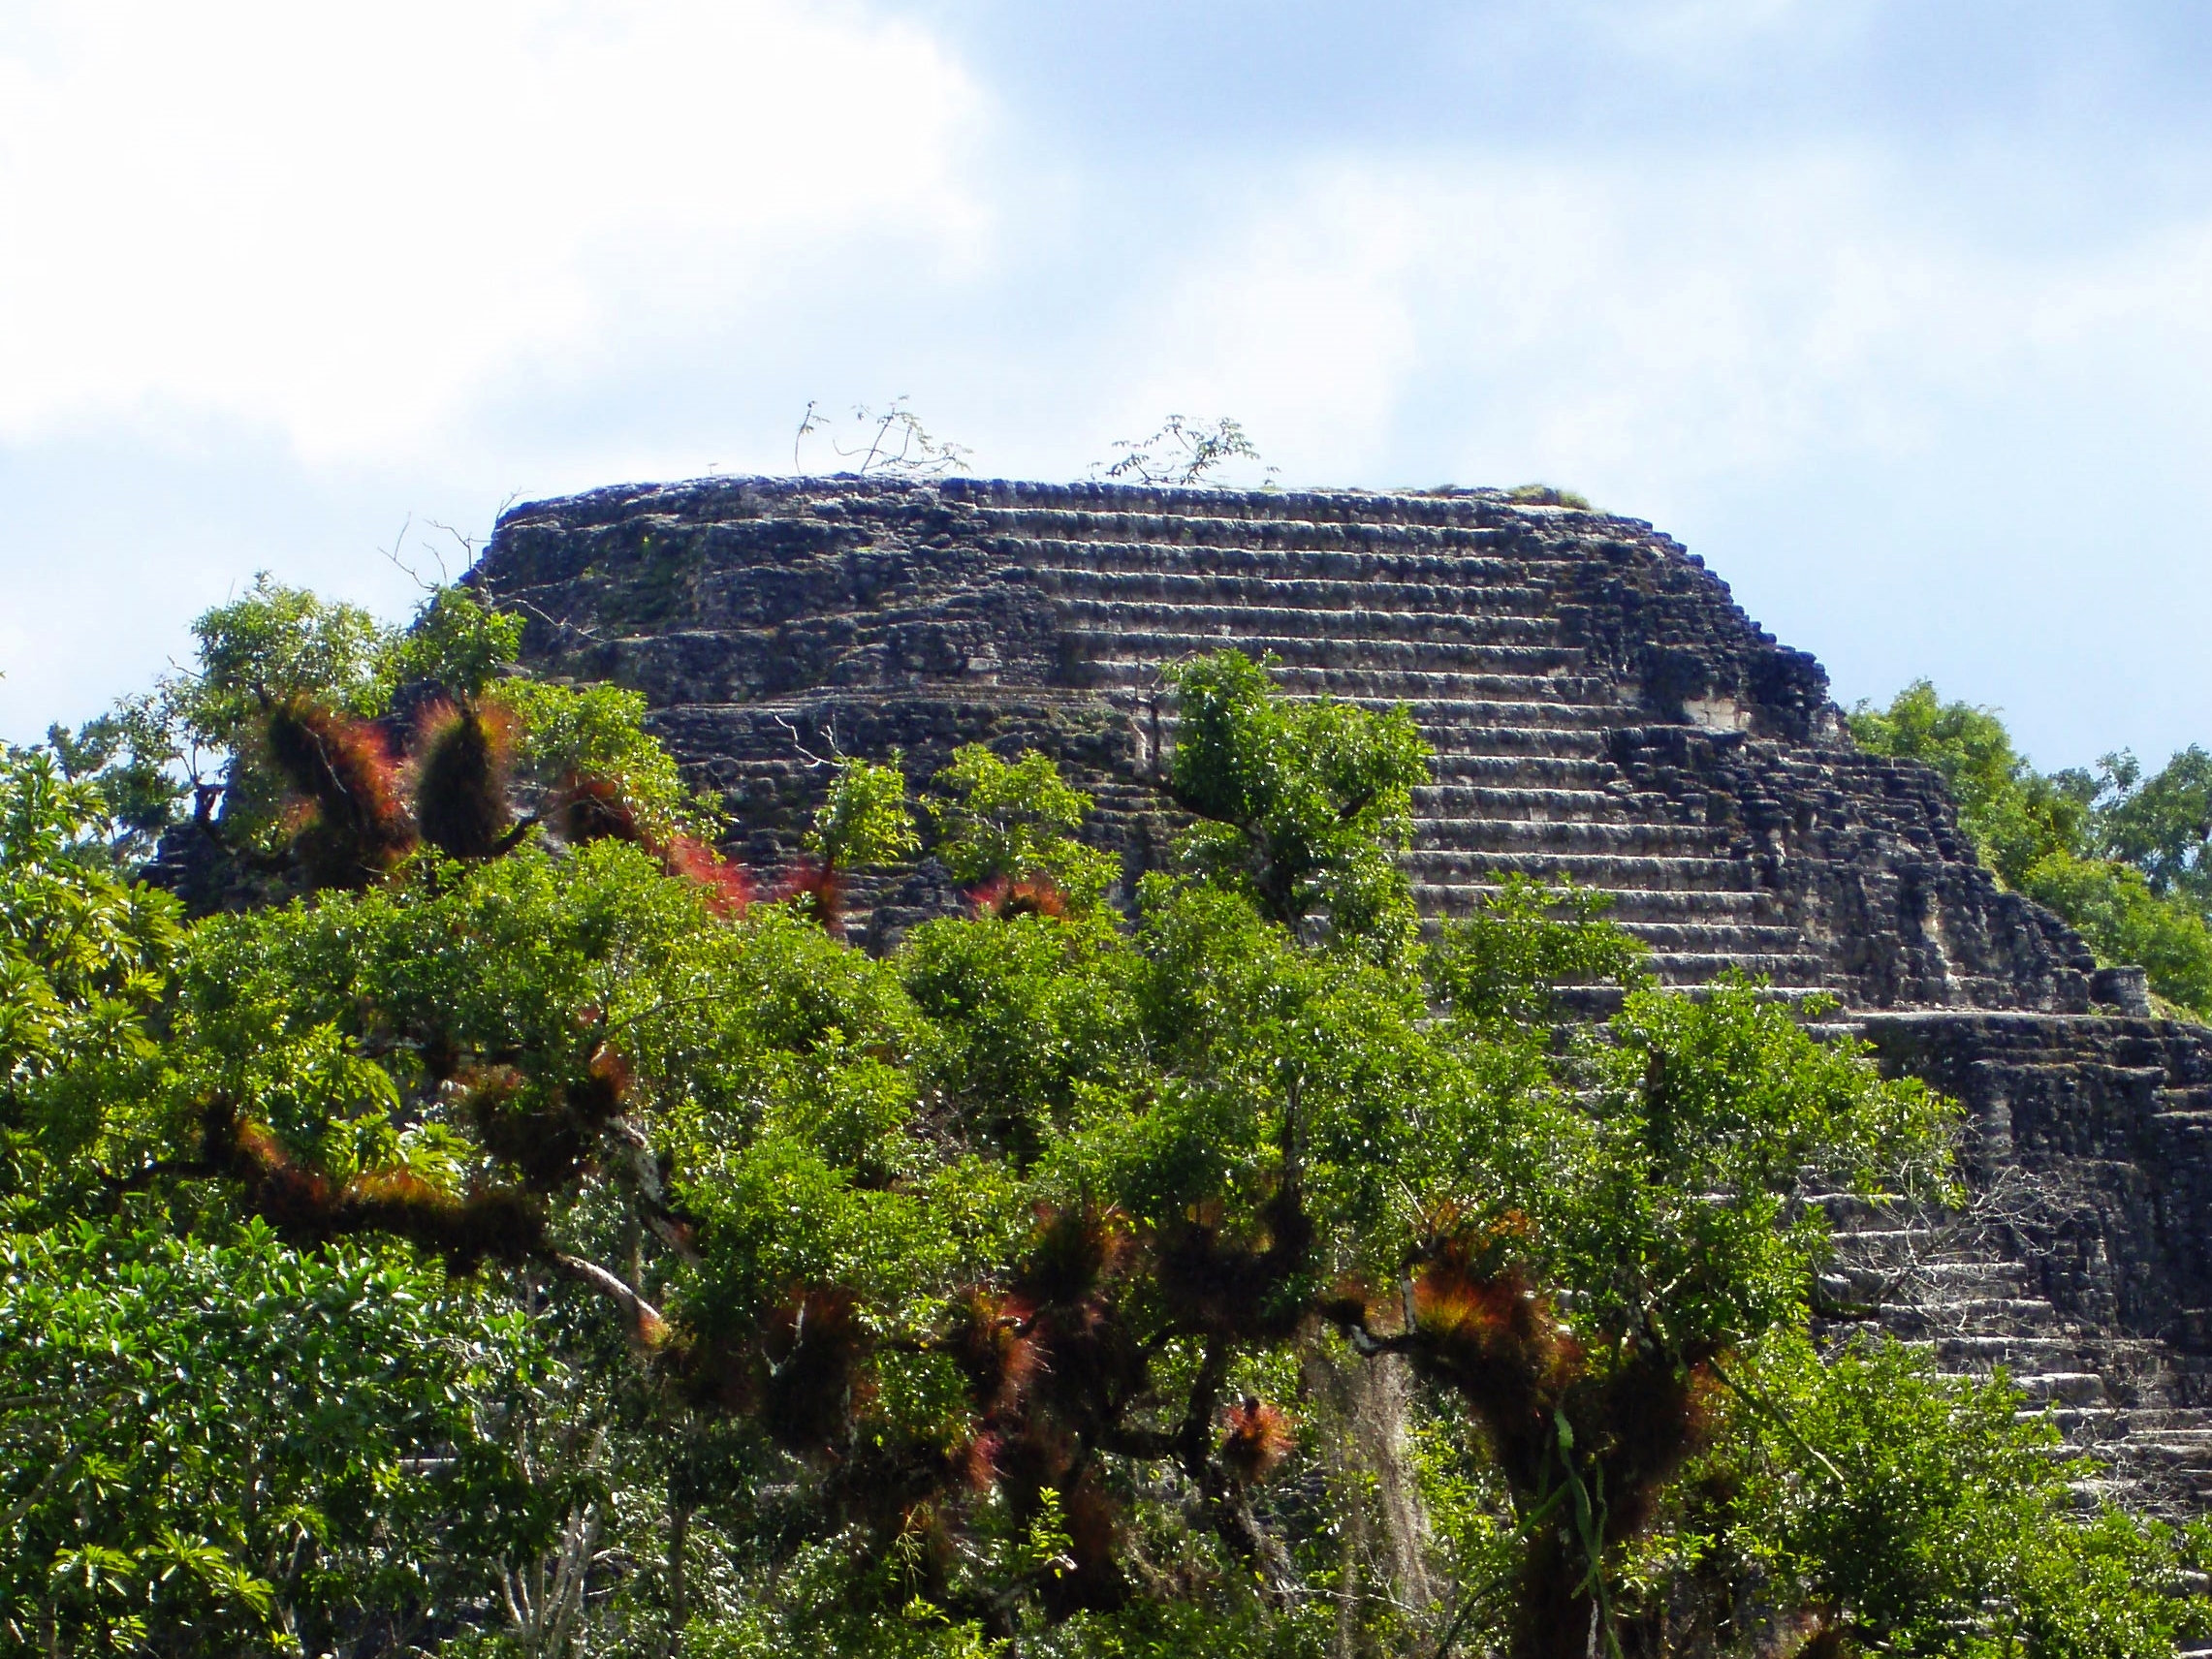 A pyramid rises above the canopy at Tikal's "Lost World"